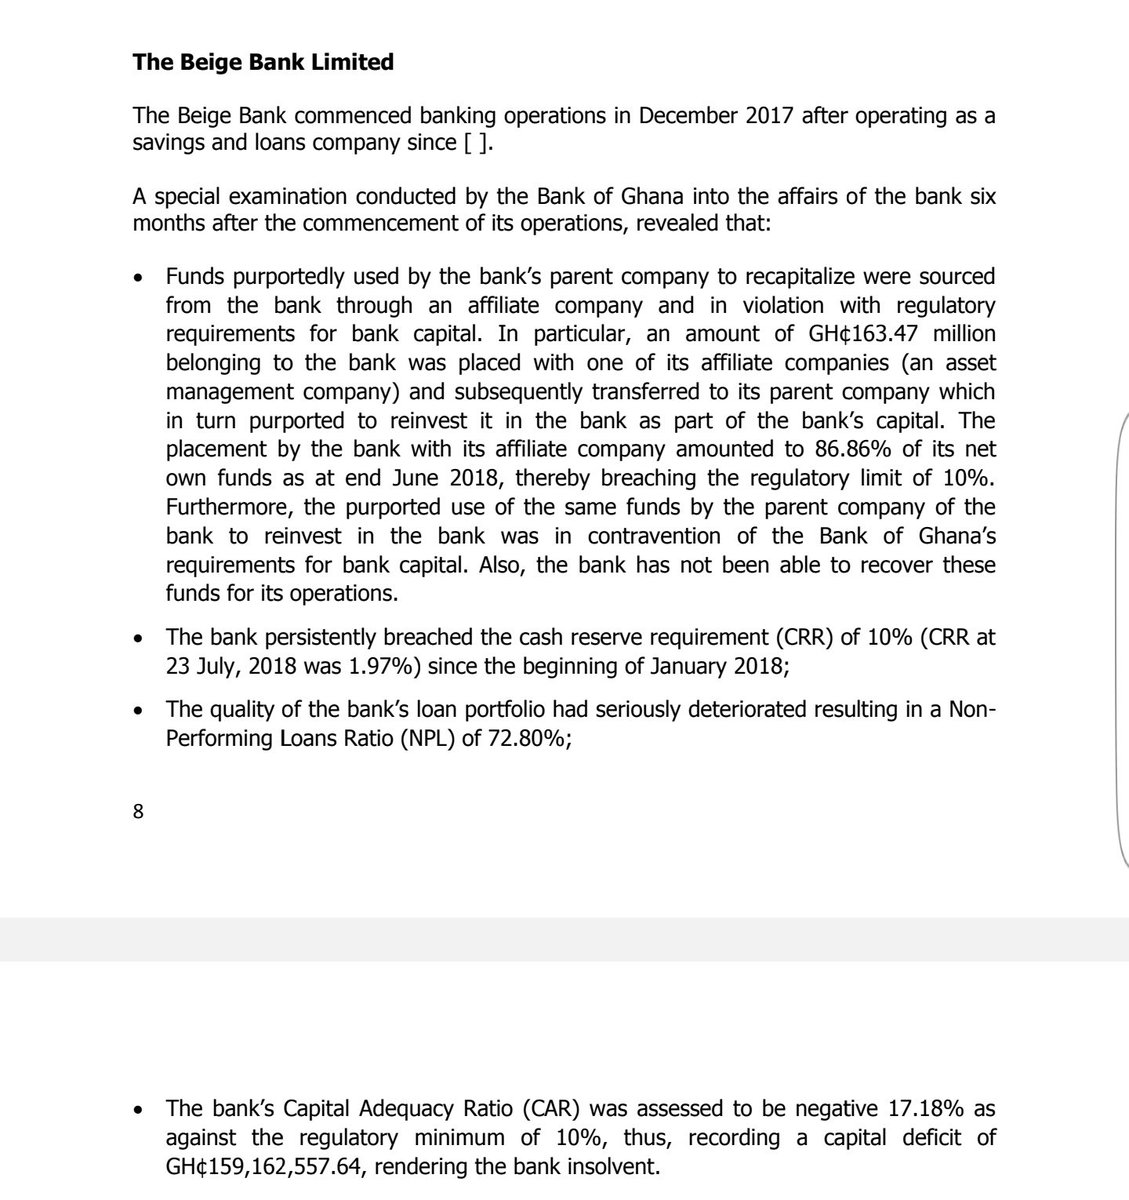 5. Beige Bank. GH¢163.47 million belonging to depositors of the bank was laundered into one of its affiliate companies. The bank’s Capital Adequacy Ratio was a -17.18% as against the regulatory minimum of 10%, thus, recording a capital deficit of GH¢159,162,557.64